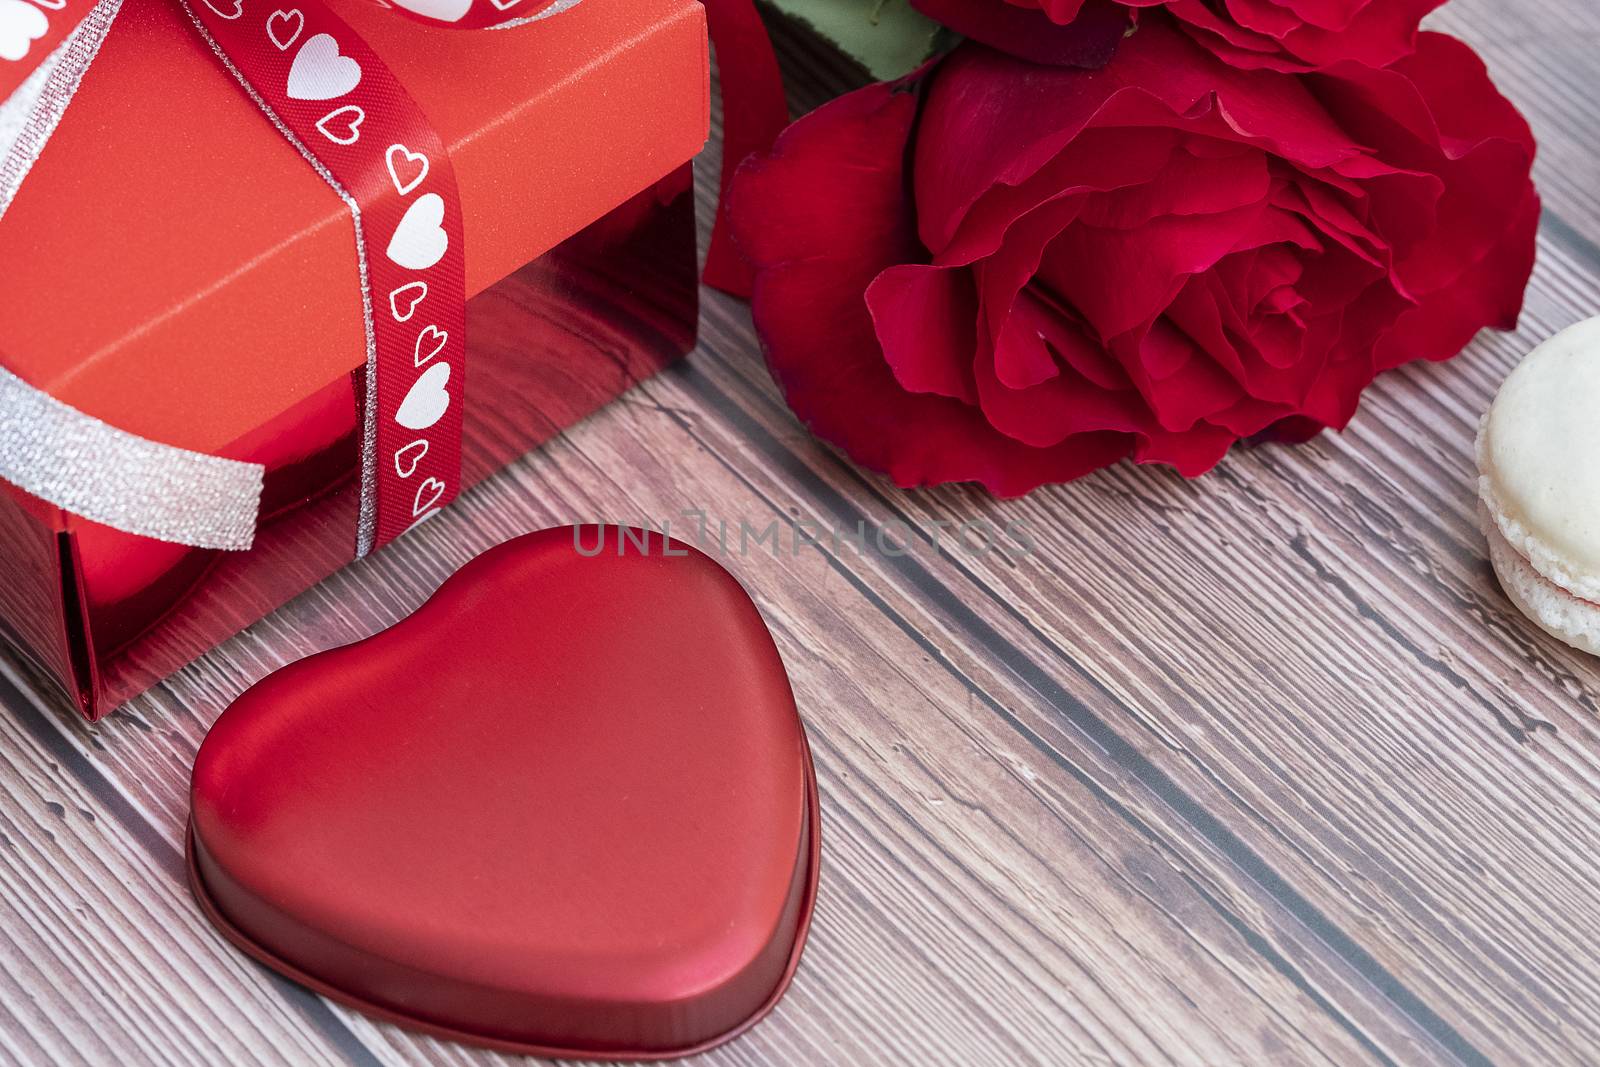 A present box with red and white heart pattern ribbons, beautiful red roses, and a red heart-shaped metal piece on brown wooden background. Love, Romance, Valentines' Day, Anniversary.